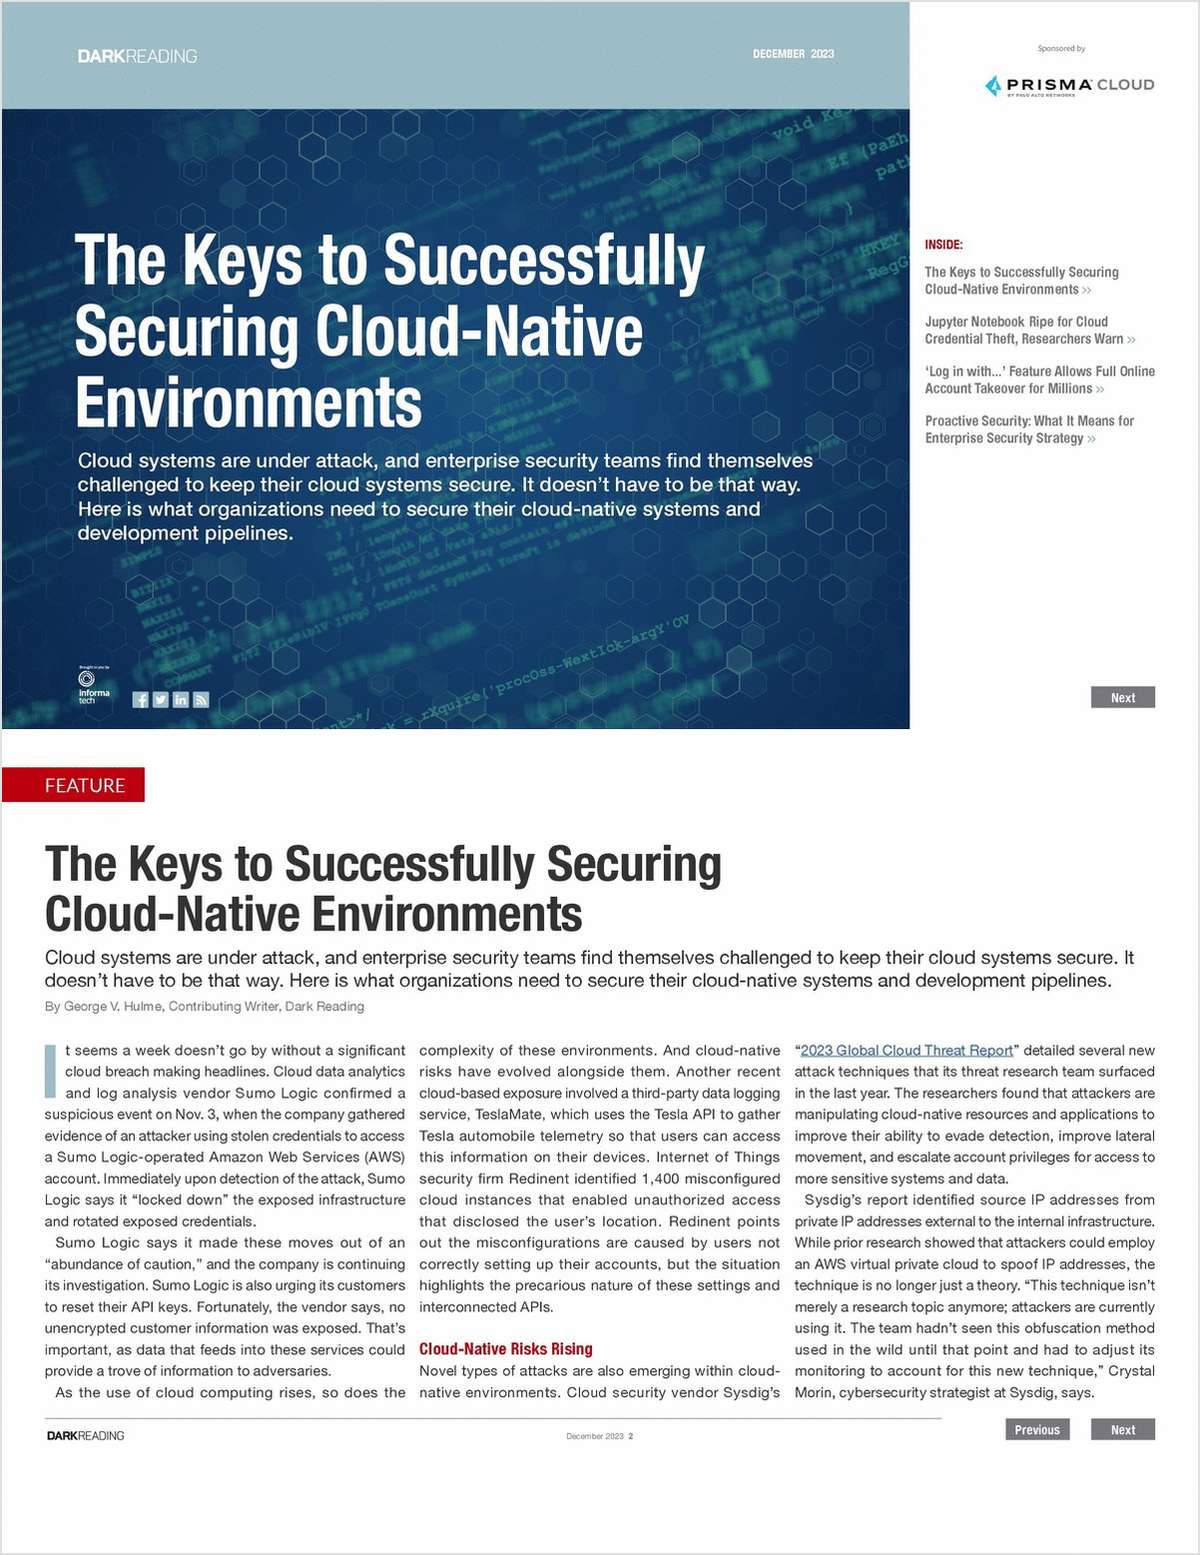 The Keys to Successfully Securing Cloud-Native Environments